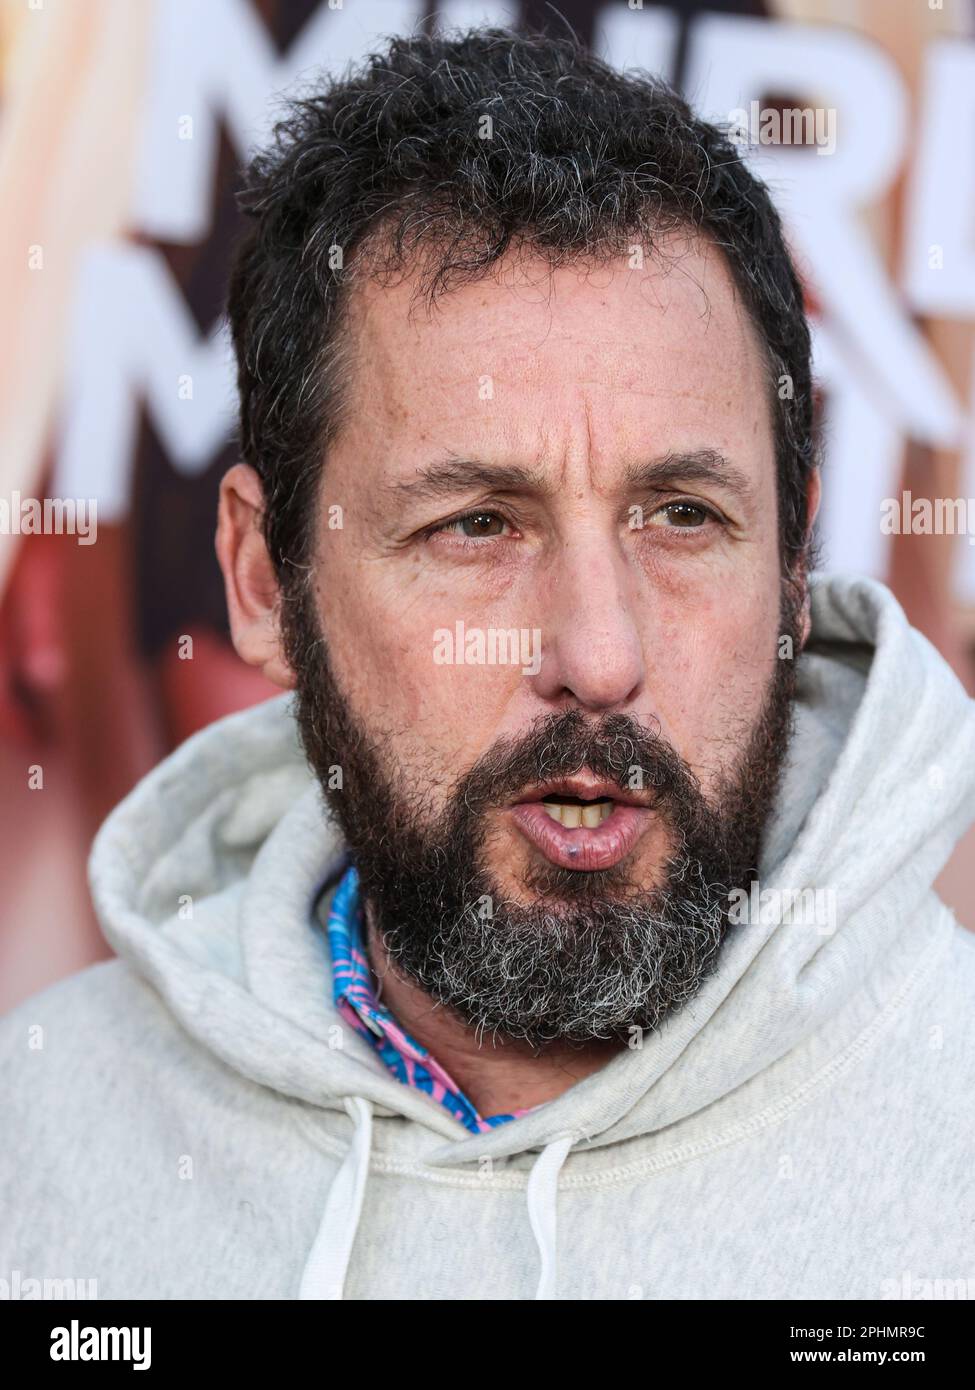 WESTWOOD, LOS ANGELES, CALIFORNIA, USA - MARCH 28: American comedian, actor, screenwriter, producer, singer and musician Adam Sandler arrives at the Los Angeles Premiere Of Netflix's 'Murder Mystery 2' held at the Regency Village Theatre on March 28, 2023 in Westwood, Los Angeles, California, United States. (Photo by Xavier Collin/Image Press Agency) Stock Photo